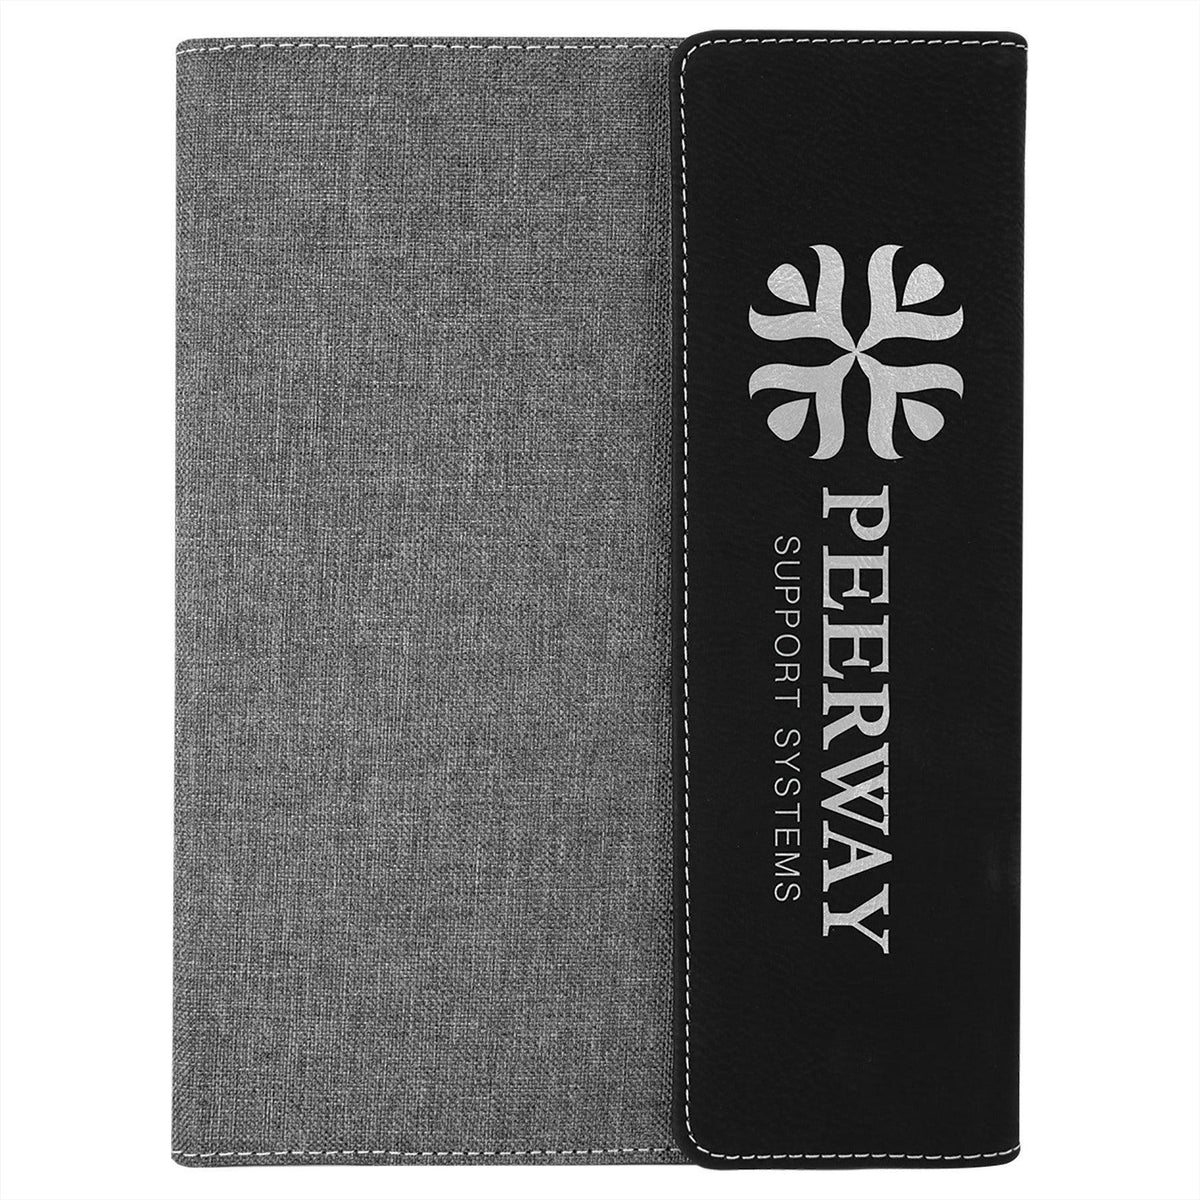 gray fabric 7"x9" portfolio closed with black leatherette flap engraved with silver engraving